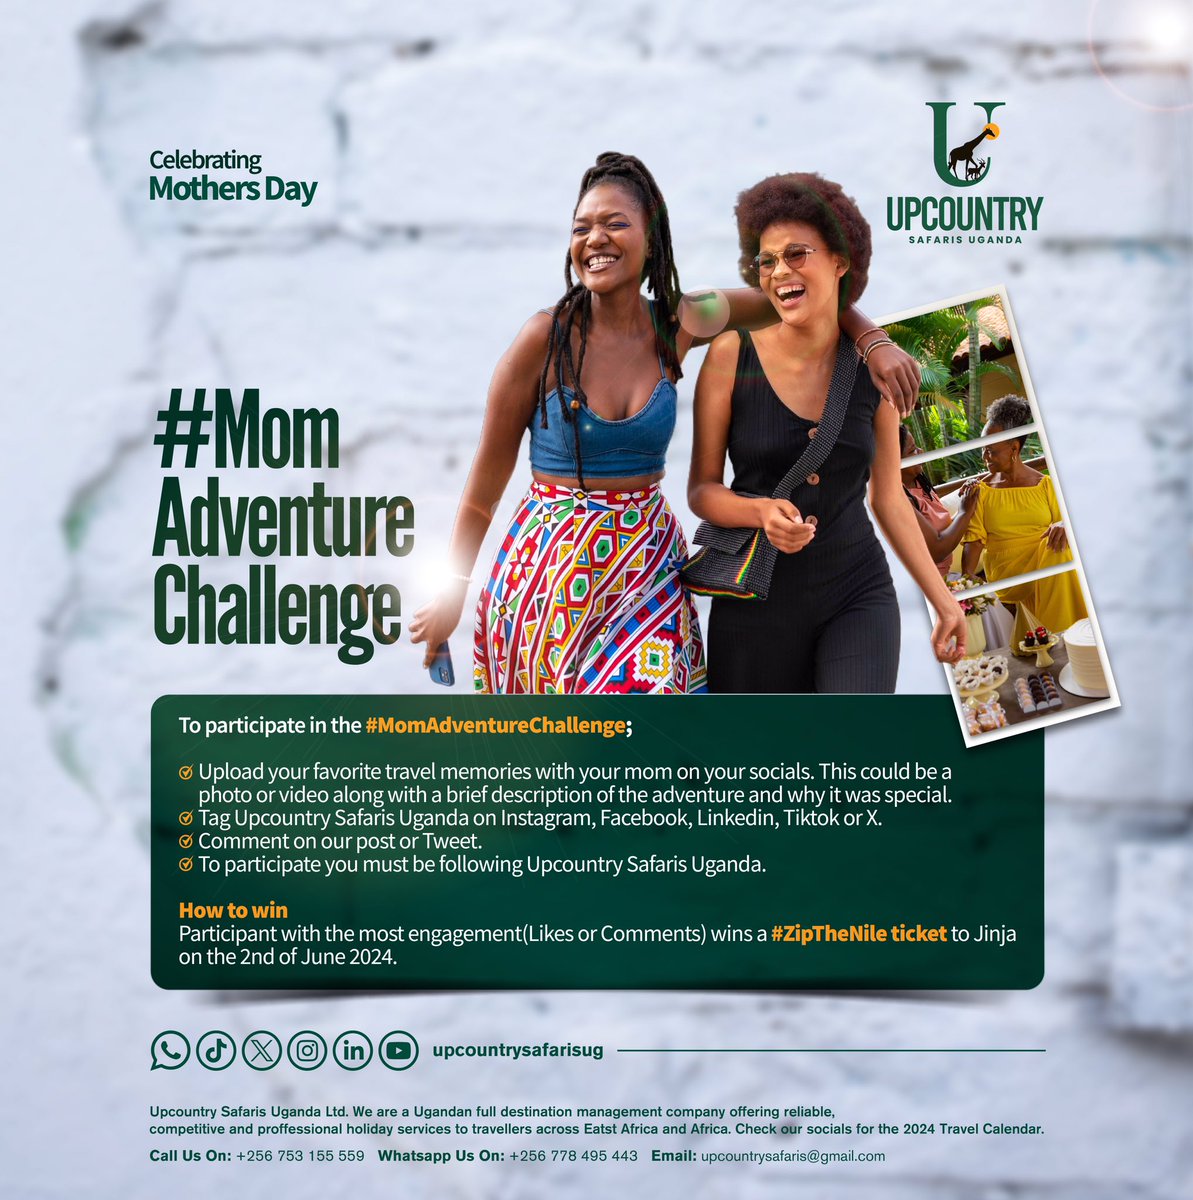 #MomAdventureChallenge Post a travel memory (picture/video) of your and your mom on your socials. Use hashtag #MomAdventureChallenge And stand a chance to win a ticket to our #ZipTheNile trip to Jinja 2nd June #travel #mothersday #upcountrysafarisug #mom #adventure #safari